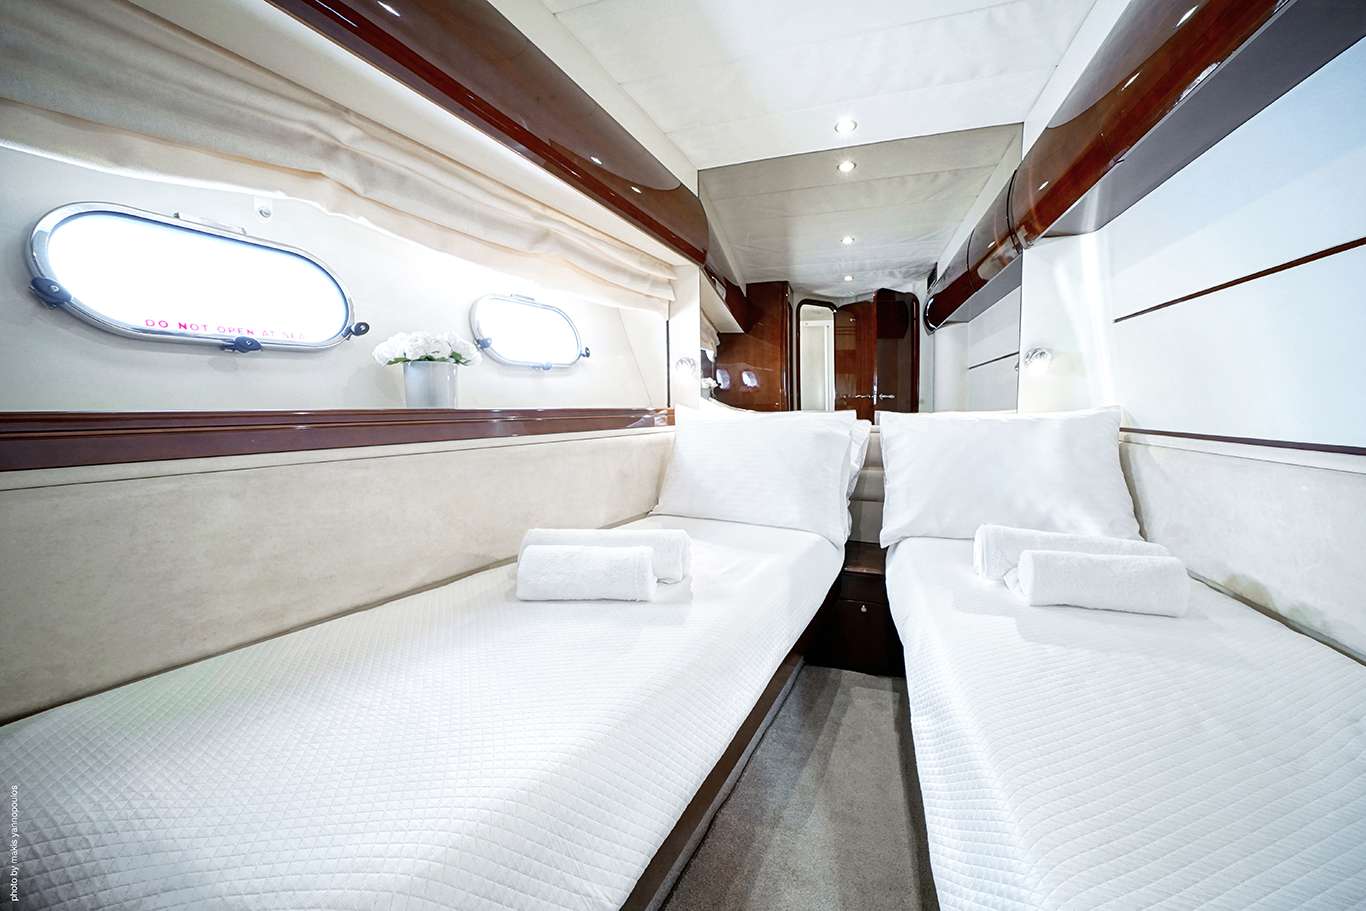 DISTAR PRINCESS Yacht Charter - Twin Cabin 2 beds converted into full bed upon request